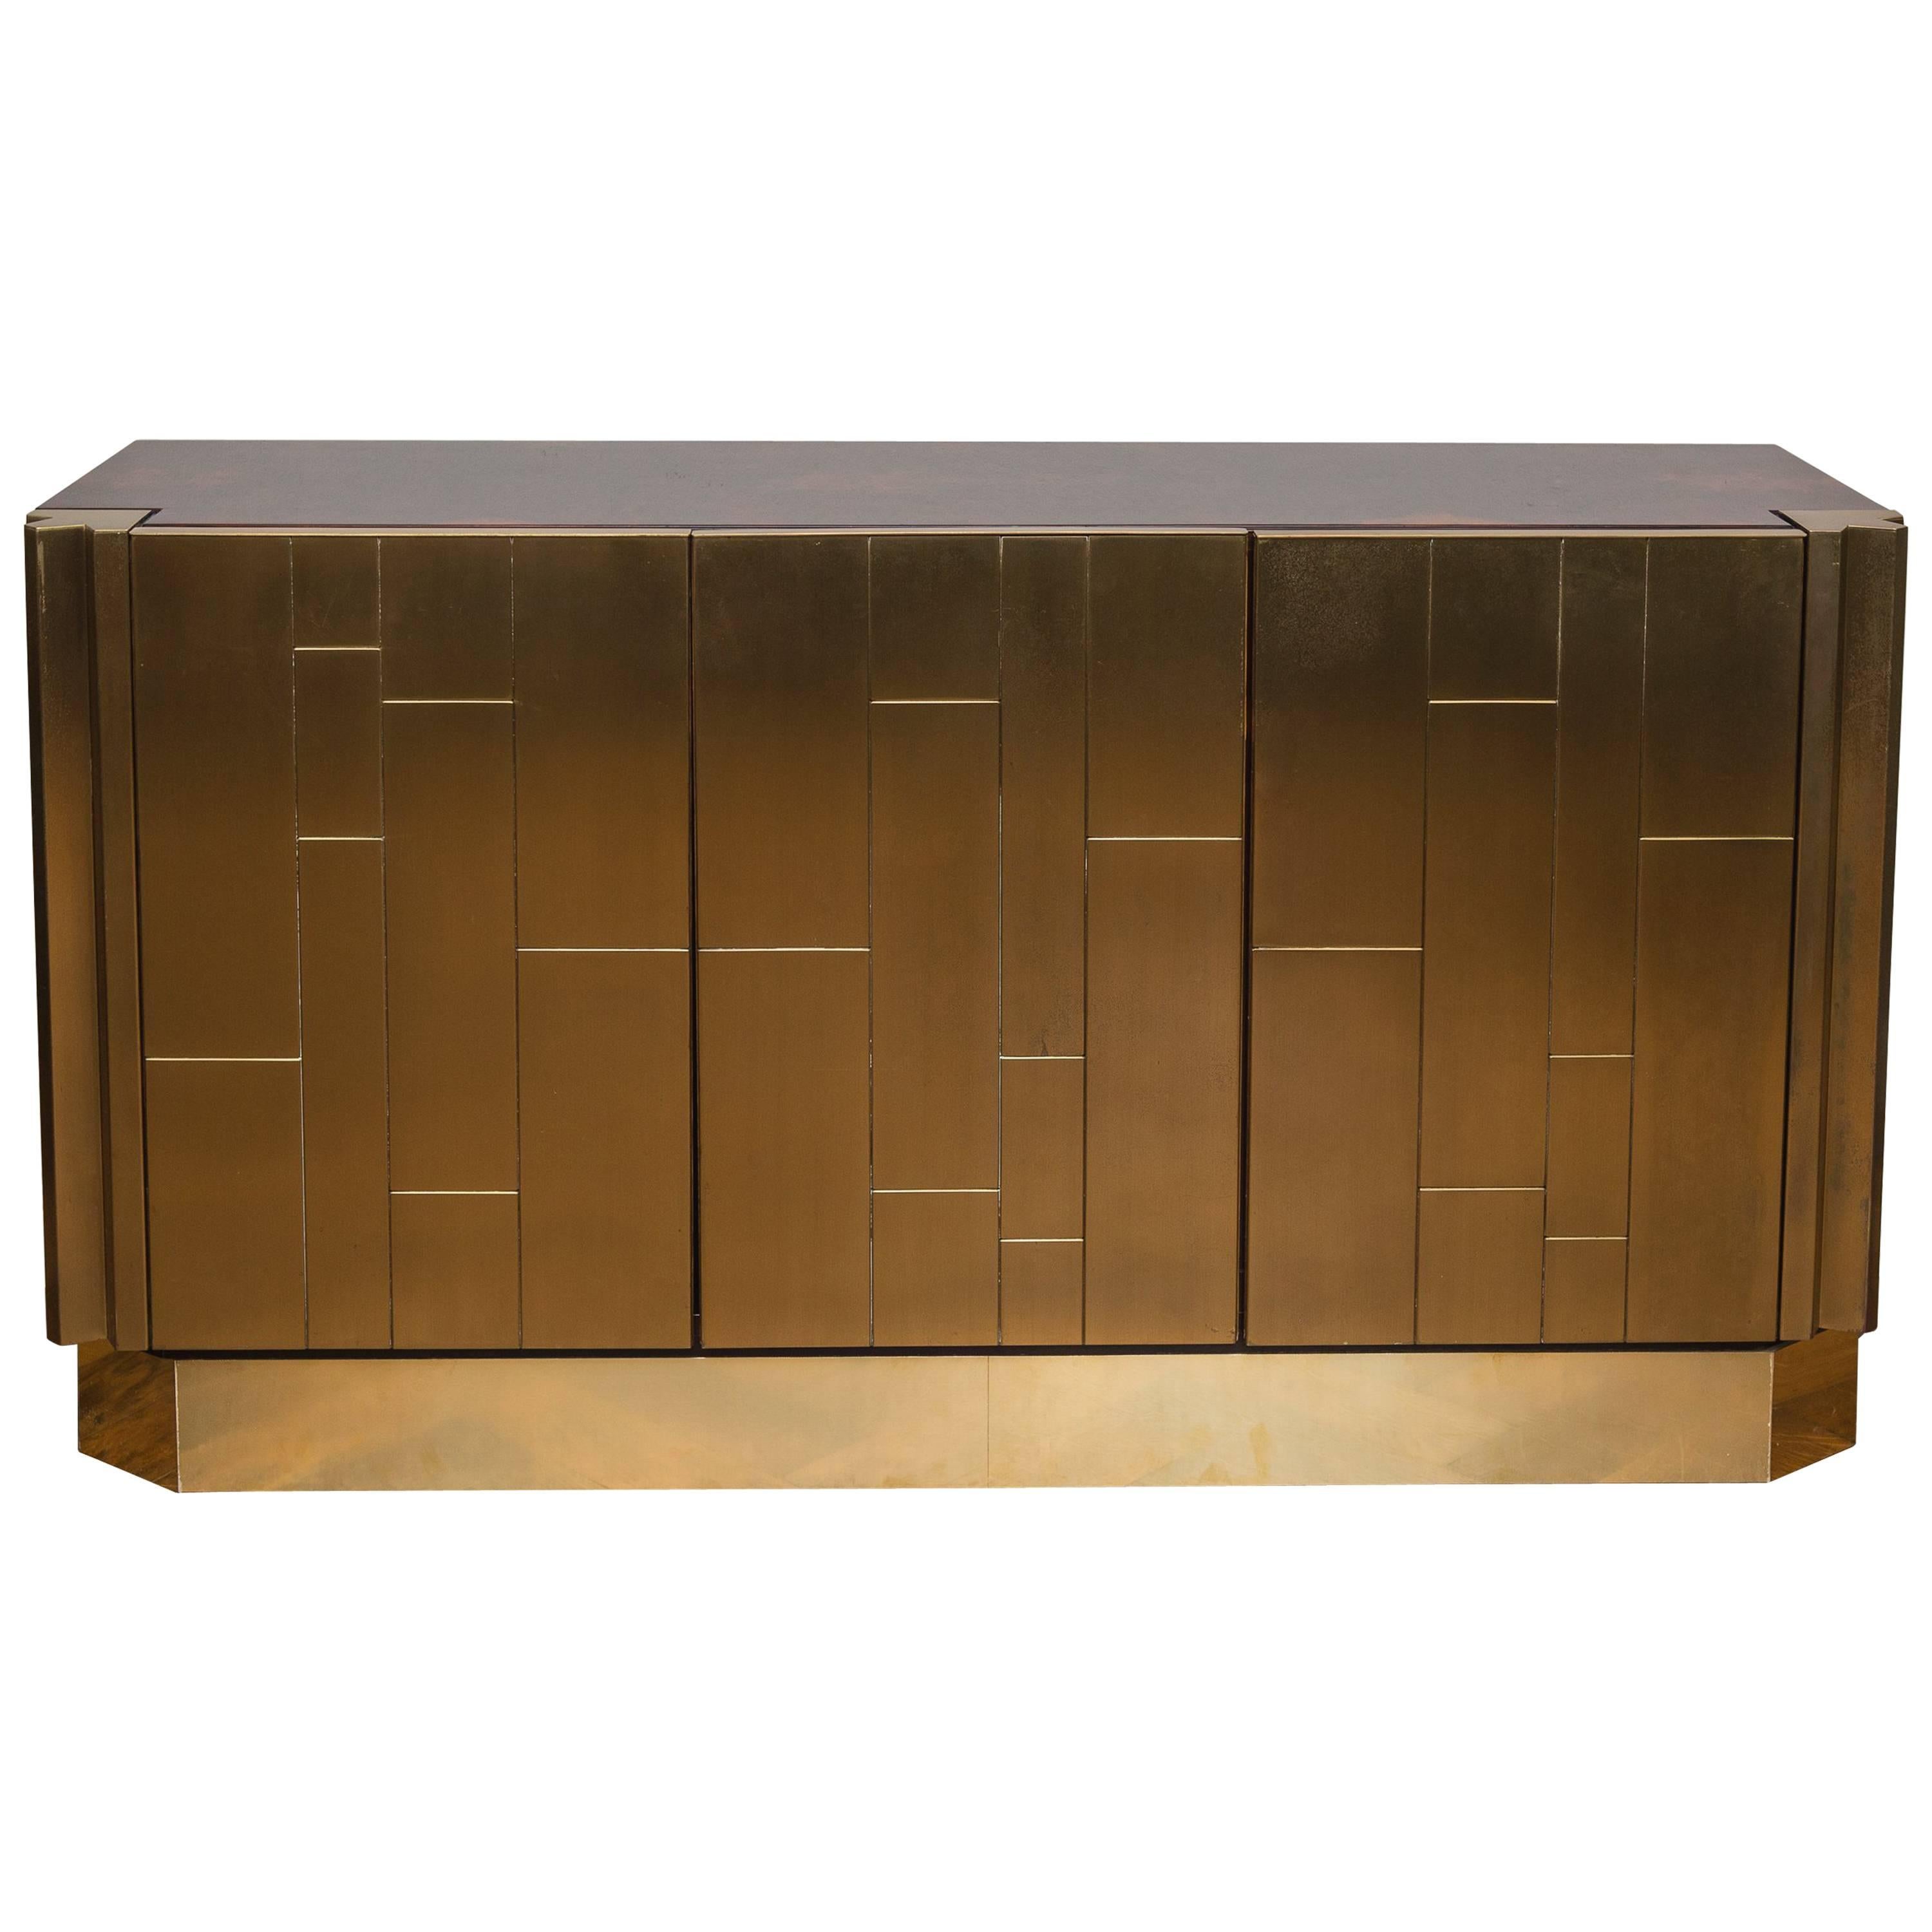 Sideboard by Luciano Frigerio, Italy, circa 1970